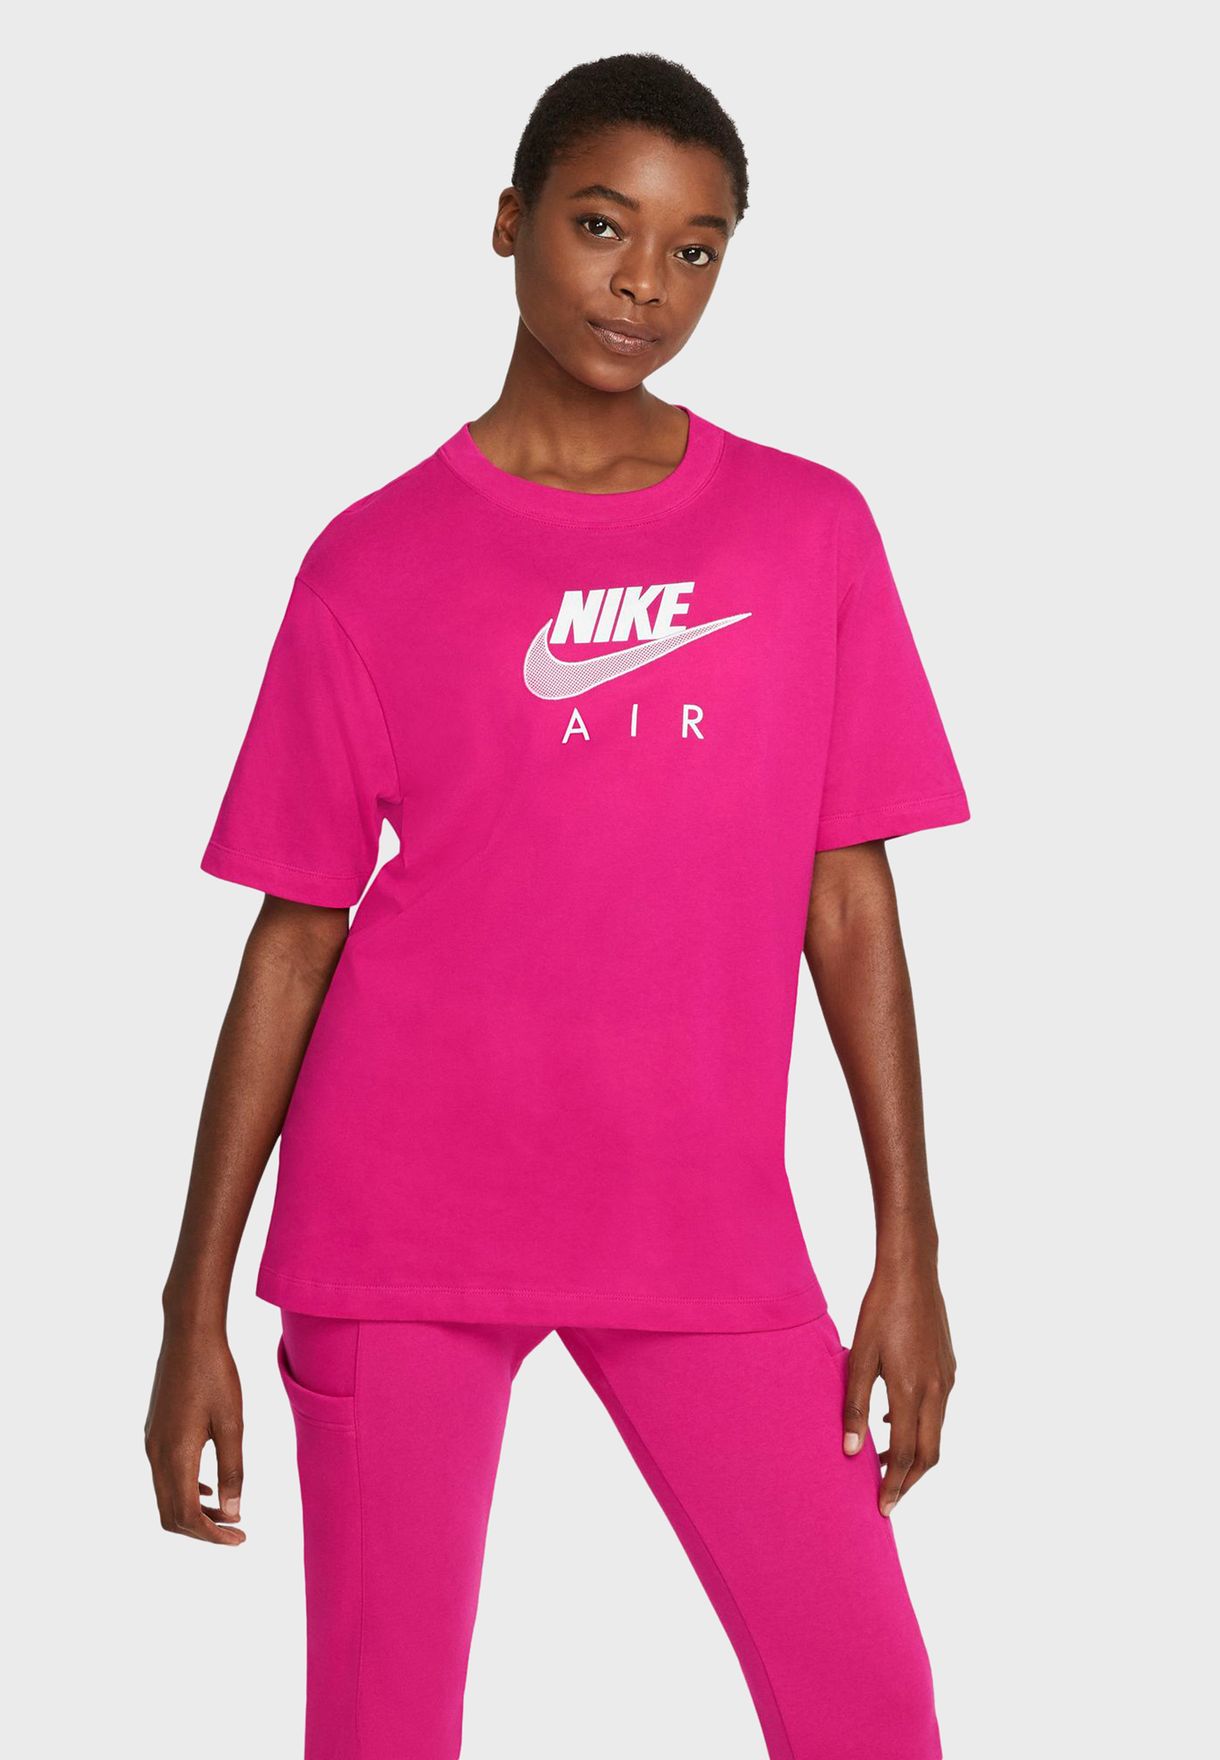 nike pink and blue shirt